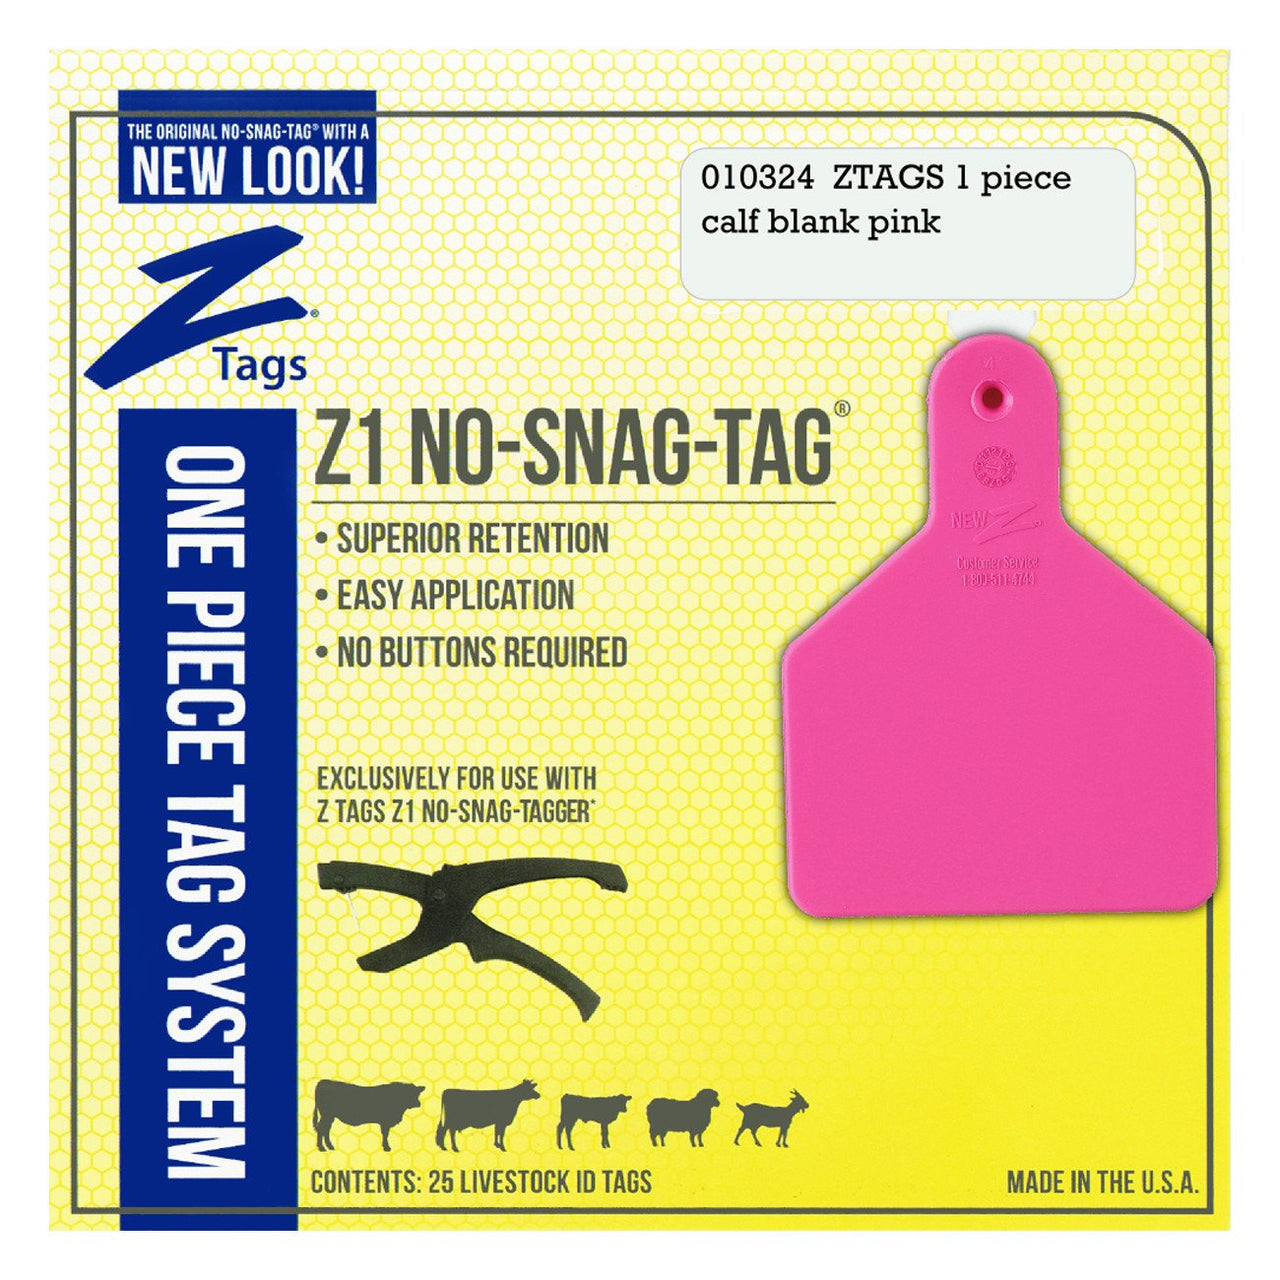 Z Tags 1 Piece Calf Blank (Pink) 25 Pack - 1 Piece Short Neck Calf Blank Tag Z Tags - Canada